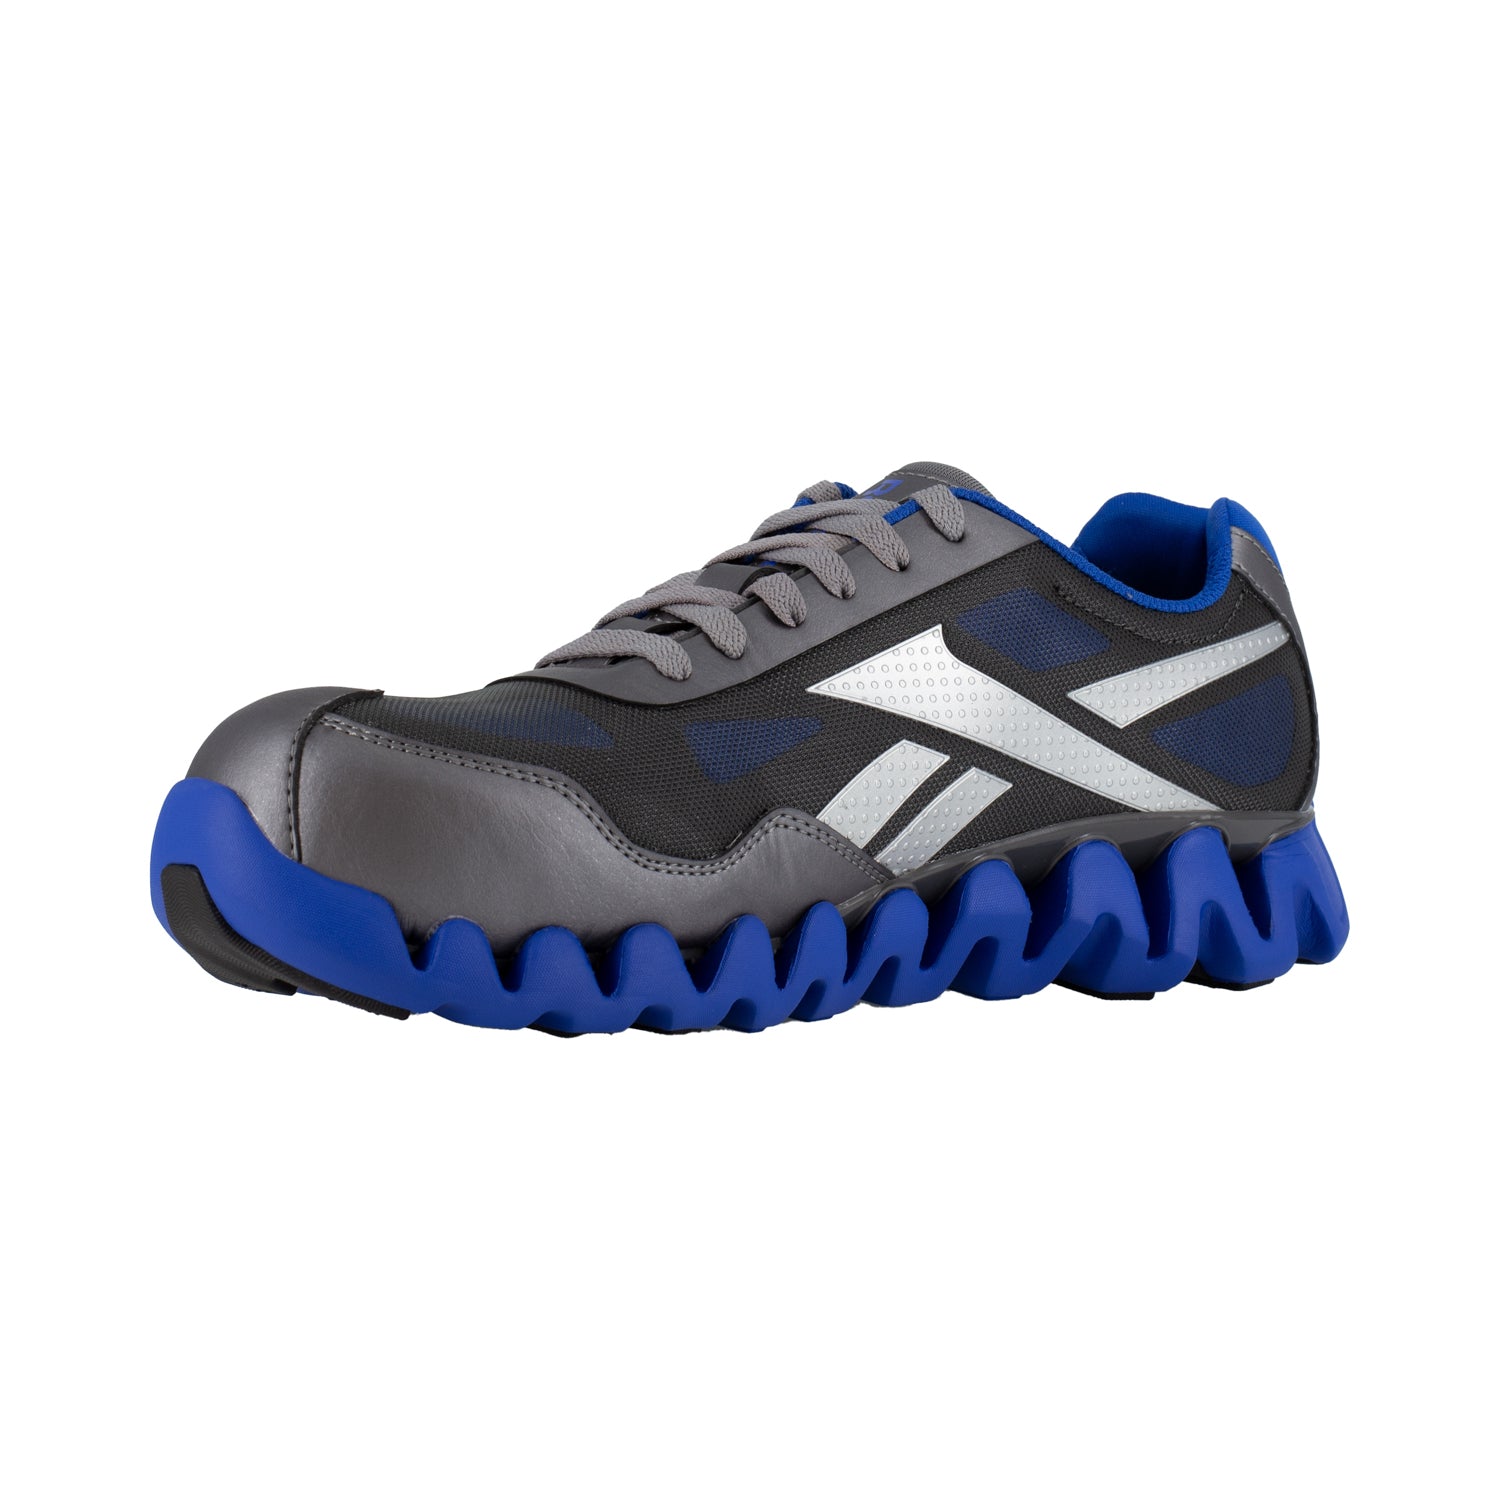 Reebok Mens Grey/Blue Mesh Work Shoes Zig Pulse Athletic CT – The Western  Company